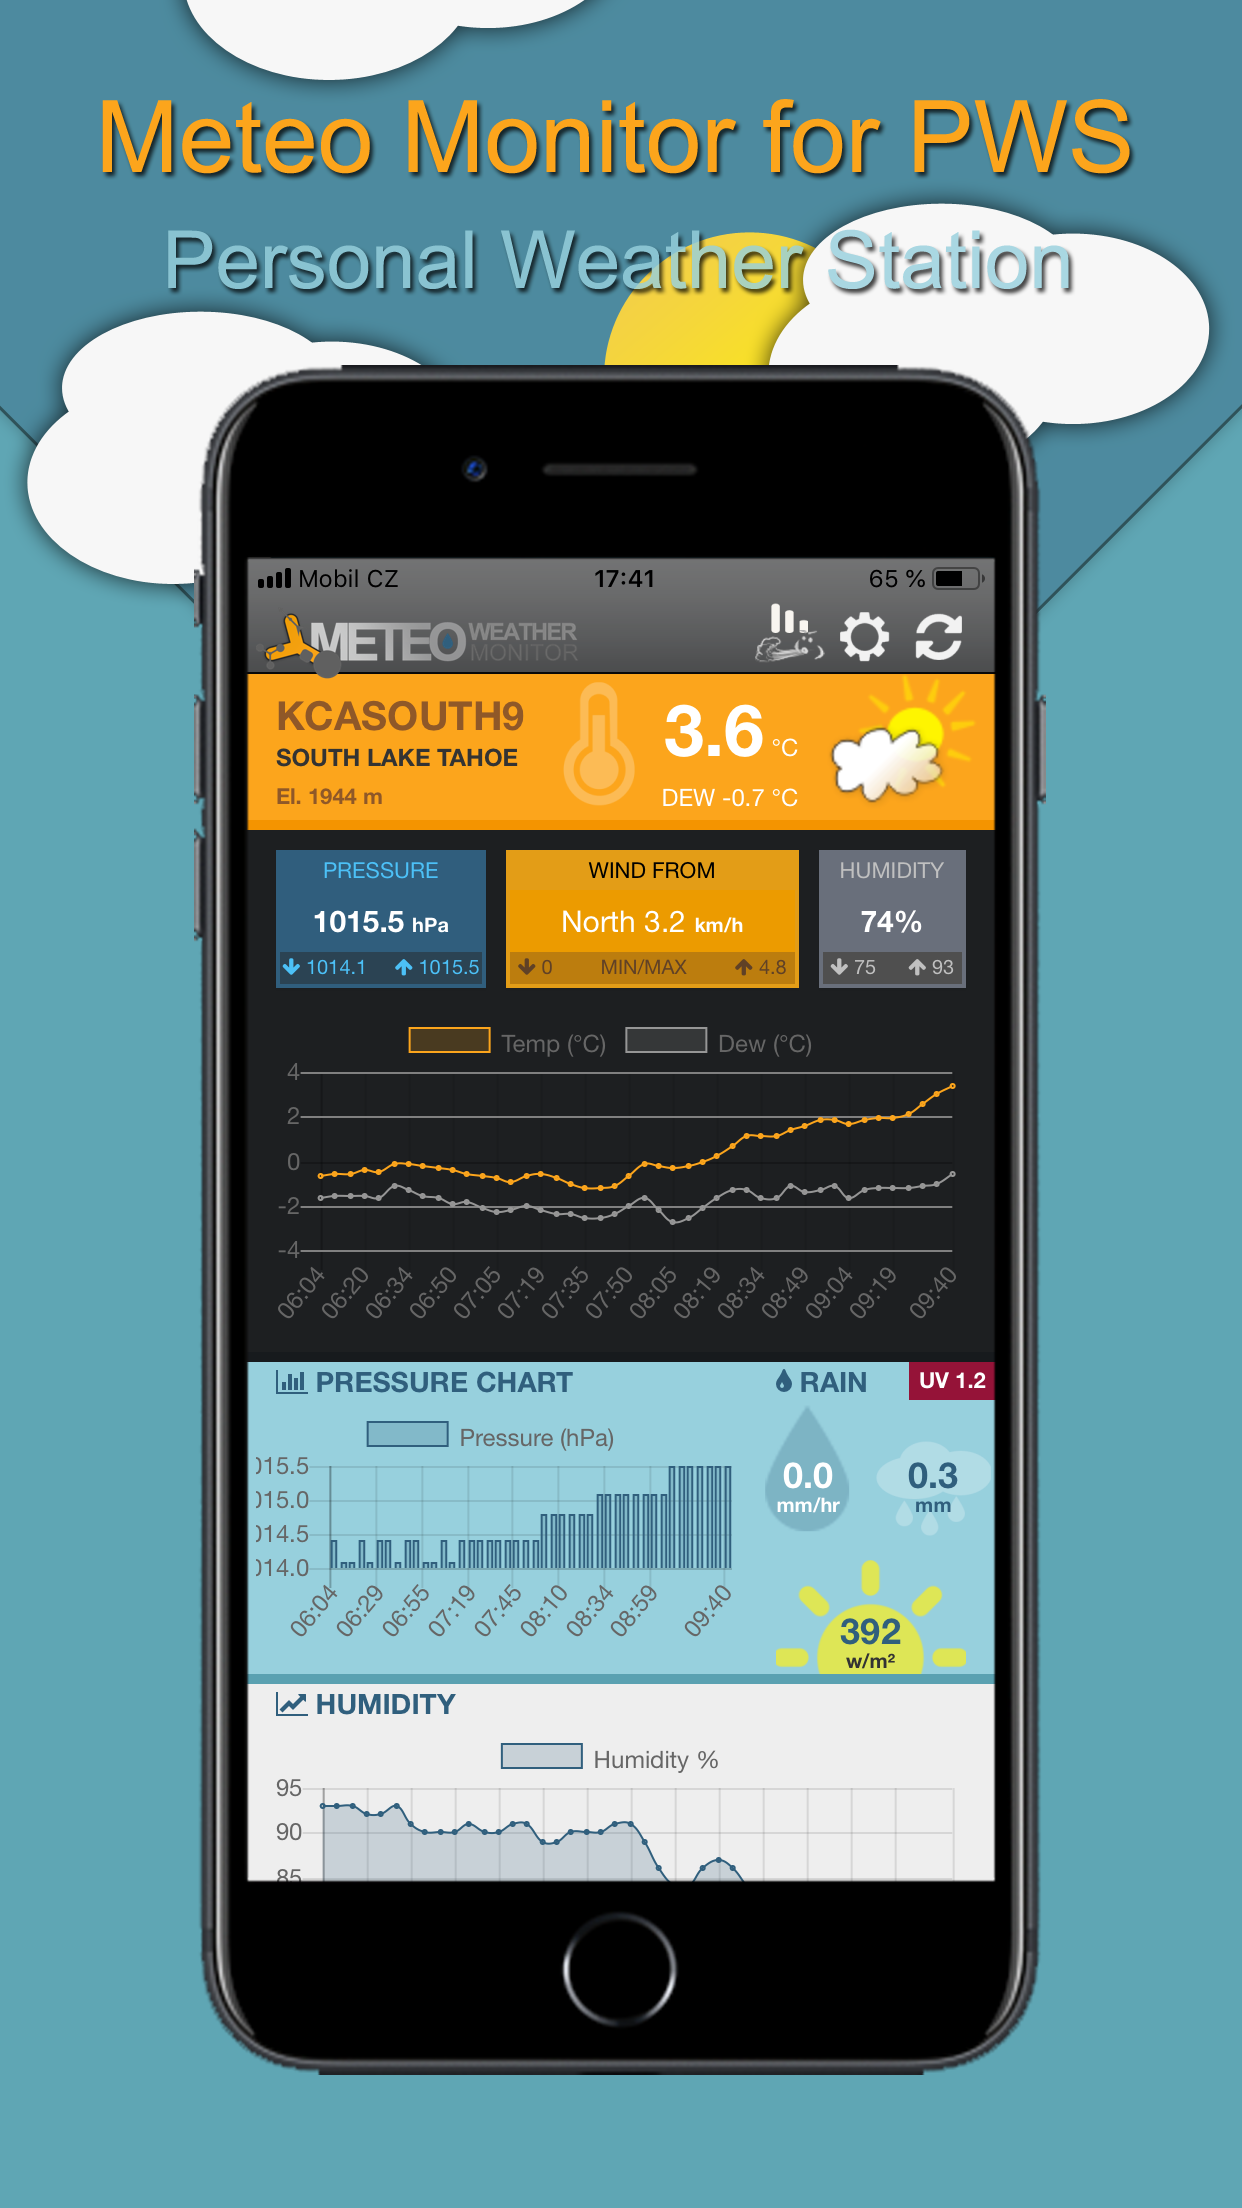 Personal Weather Station Meteo Monitor